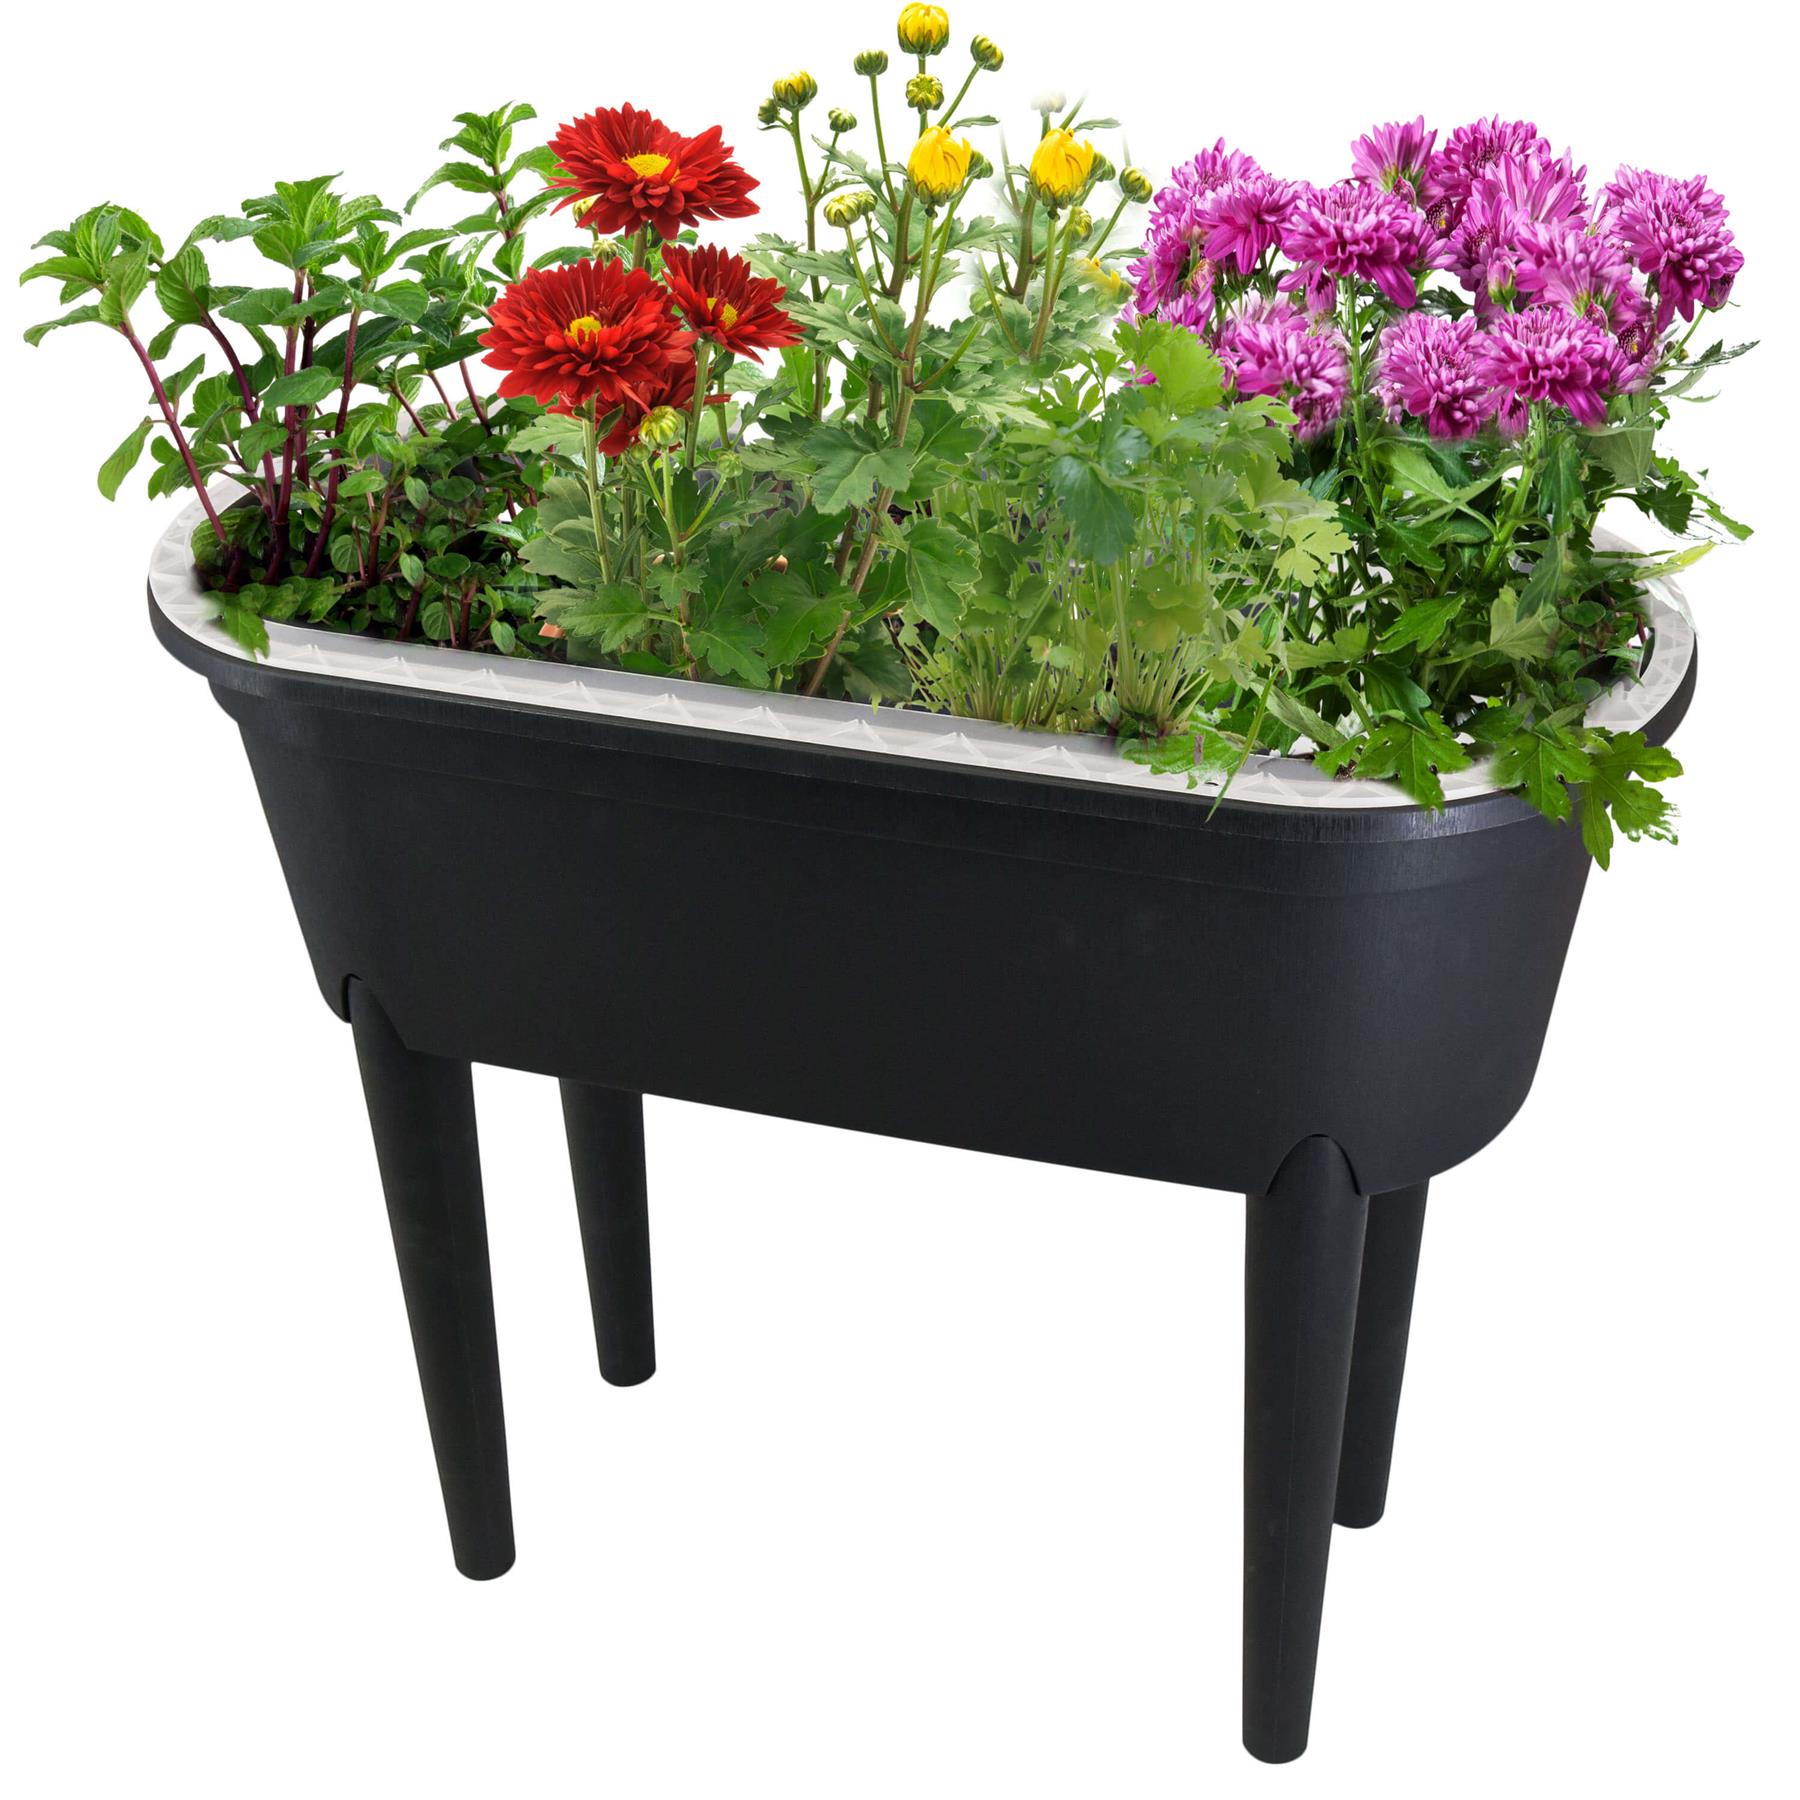 Greenhouse Flower Vegetable Herbs Planter Box by Geezy - UKBuyZone